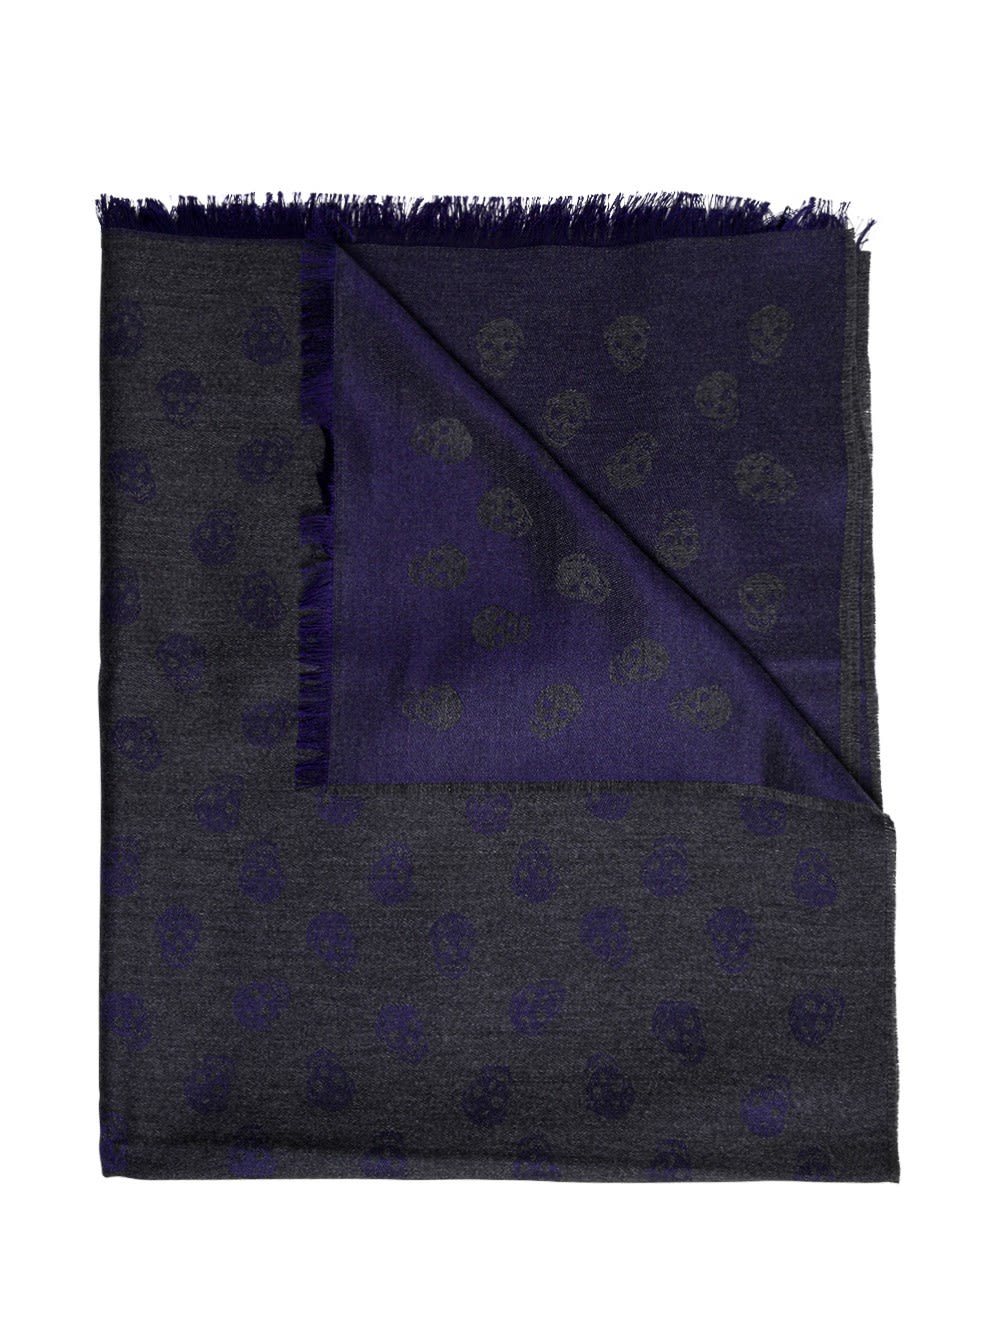 Alexander McQueen Grey And Purple Skull Scarf In Wool And Silk